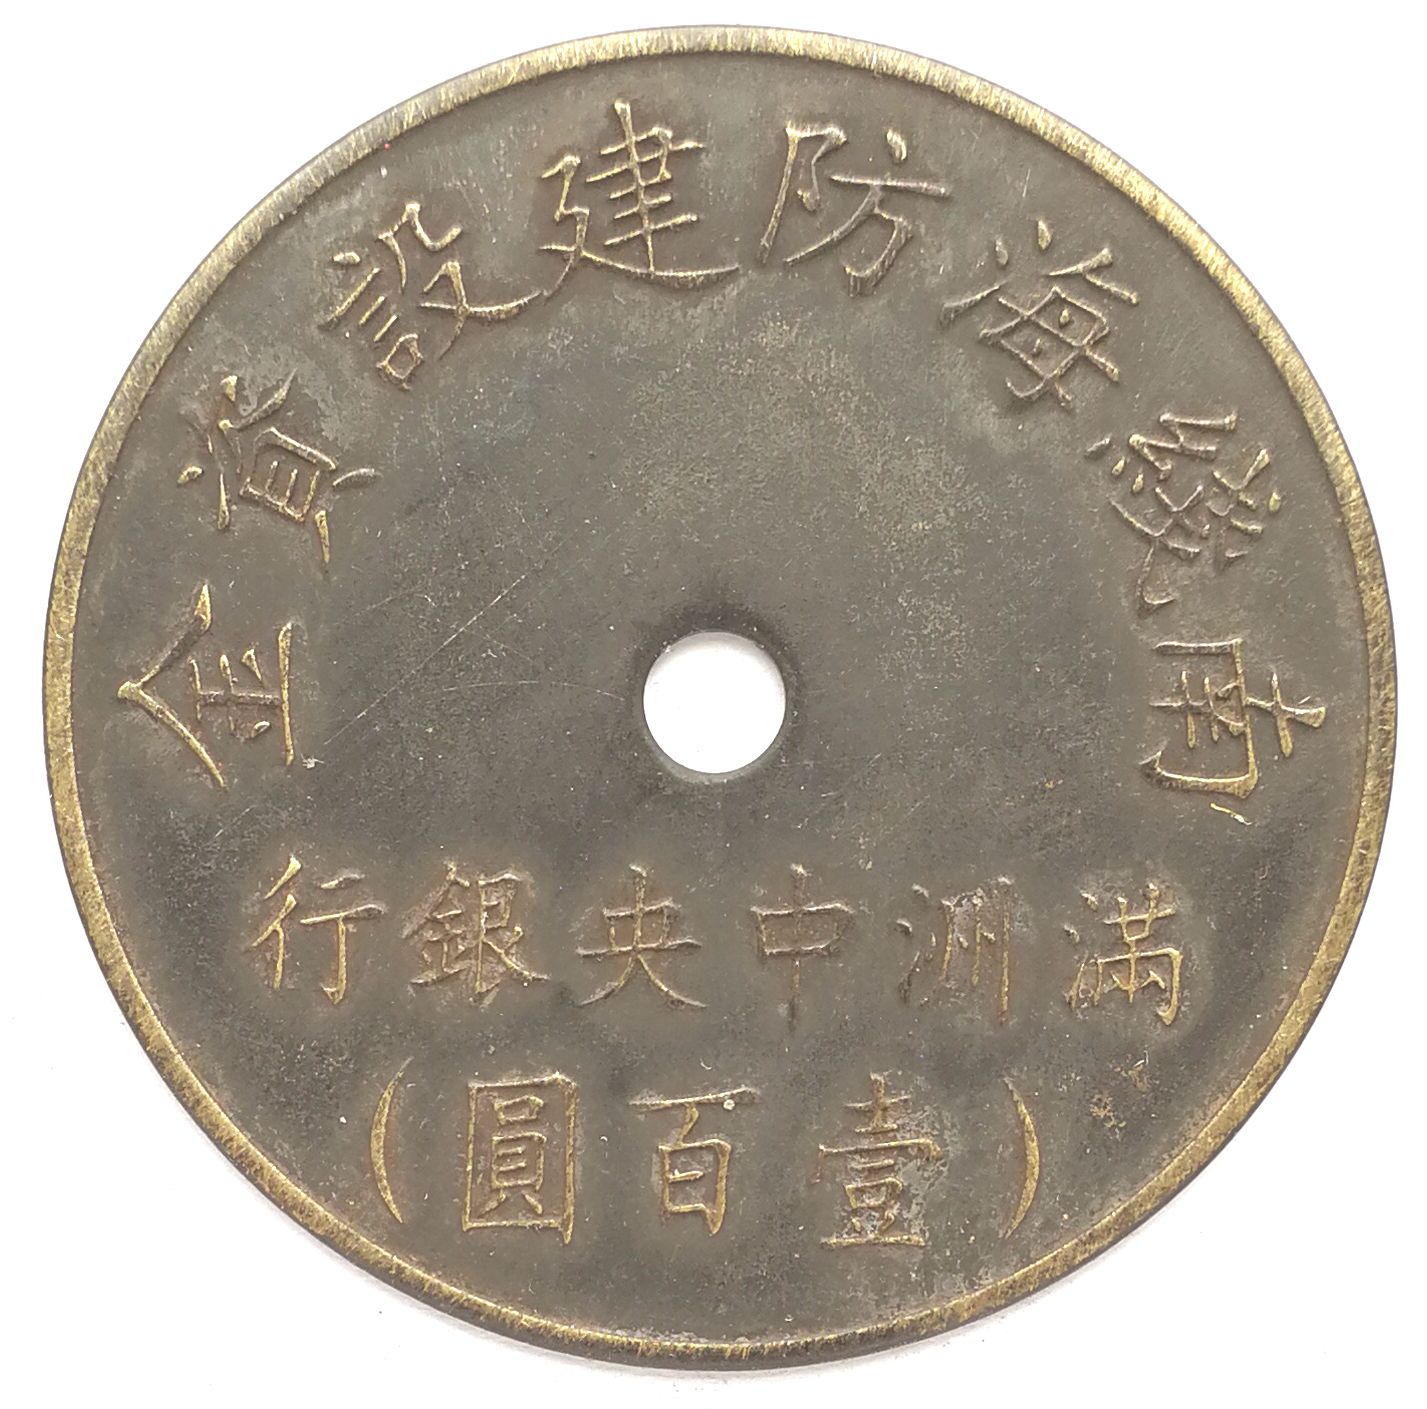 BT550, South Maritime Defence Fund, Manchukuo Central Bank , 100 Yen Token